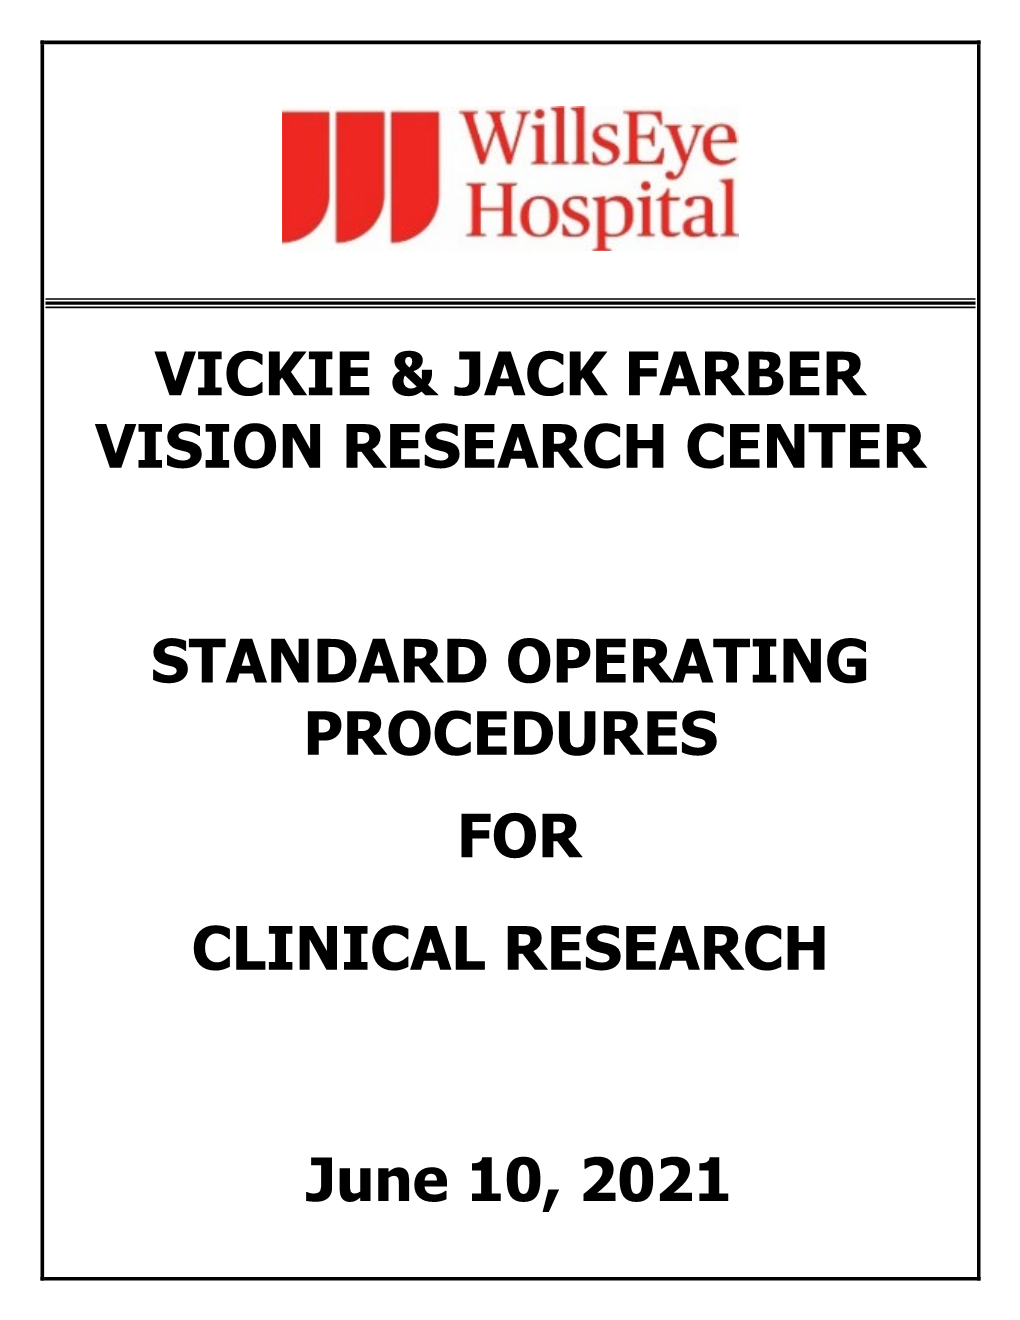 Vickie & Jack Farber Vision Research Center Standard